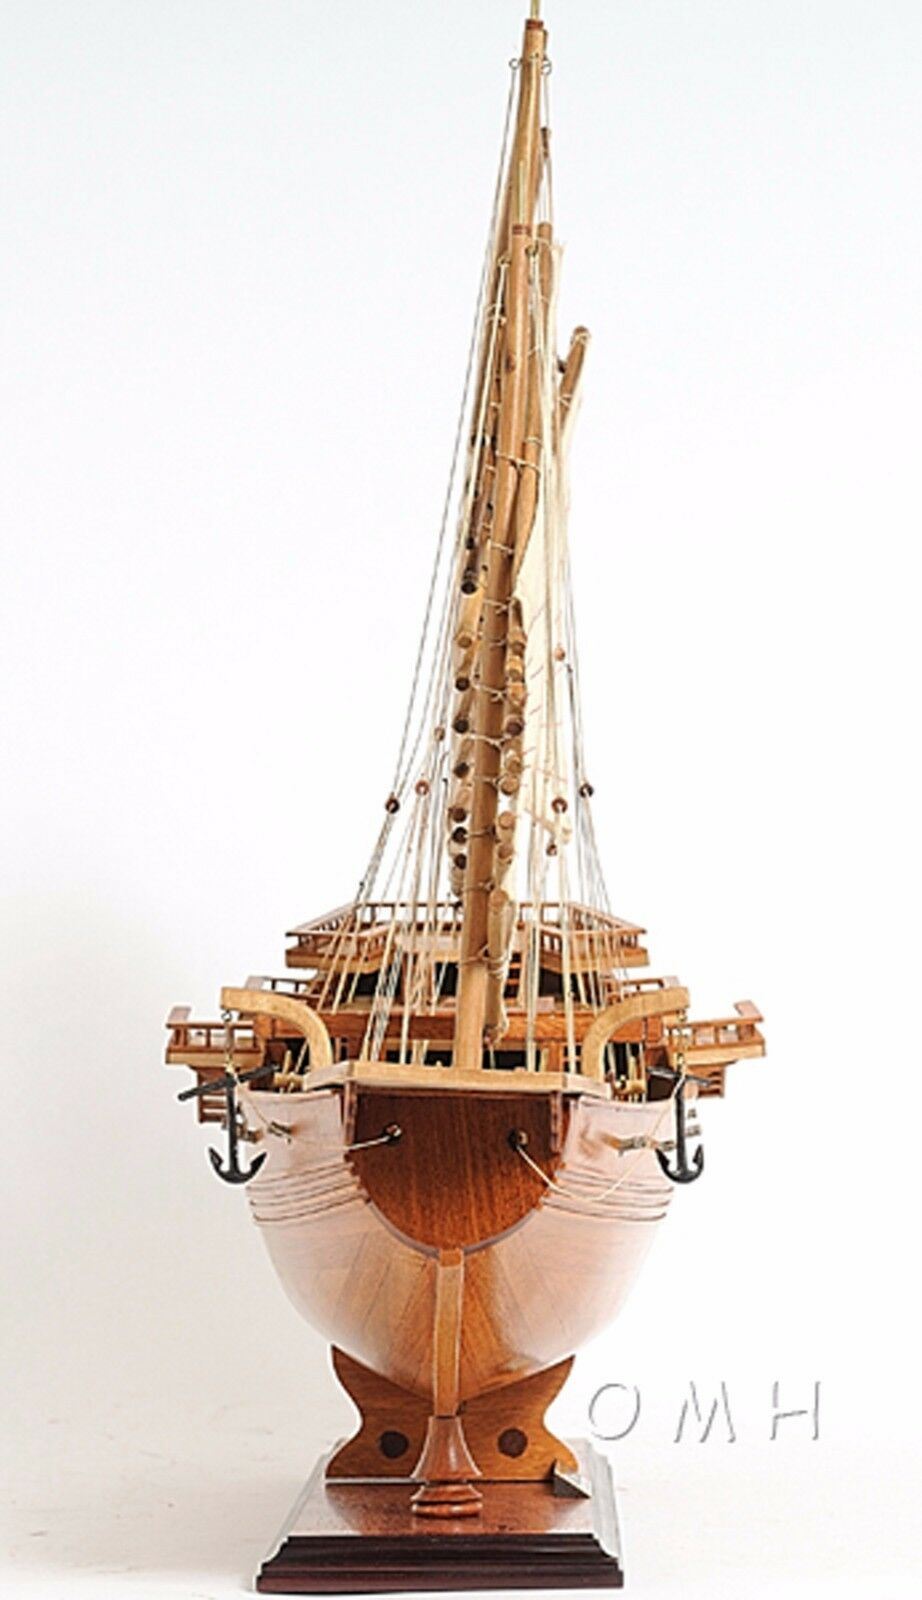 ALDO Hobbies & Creative Arts > Collectibles > Scale Models Chinese Junk Pirate Sailboat Wood Large Model Ship Assembled